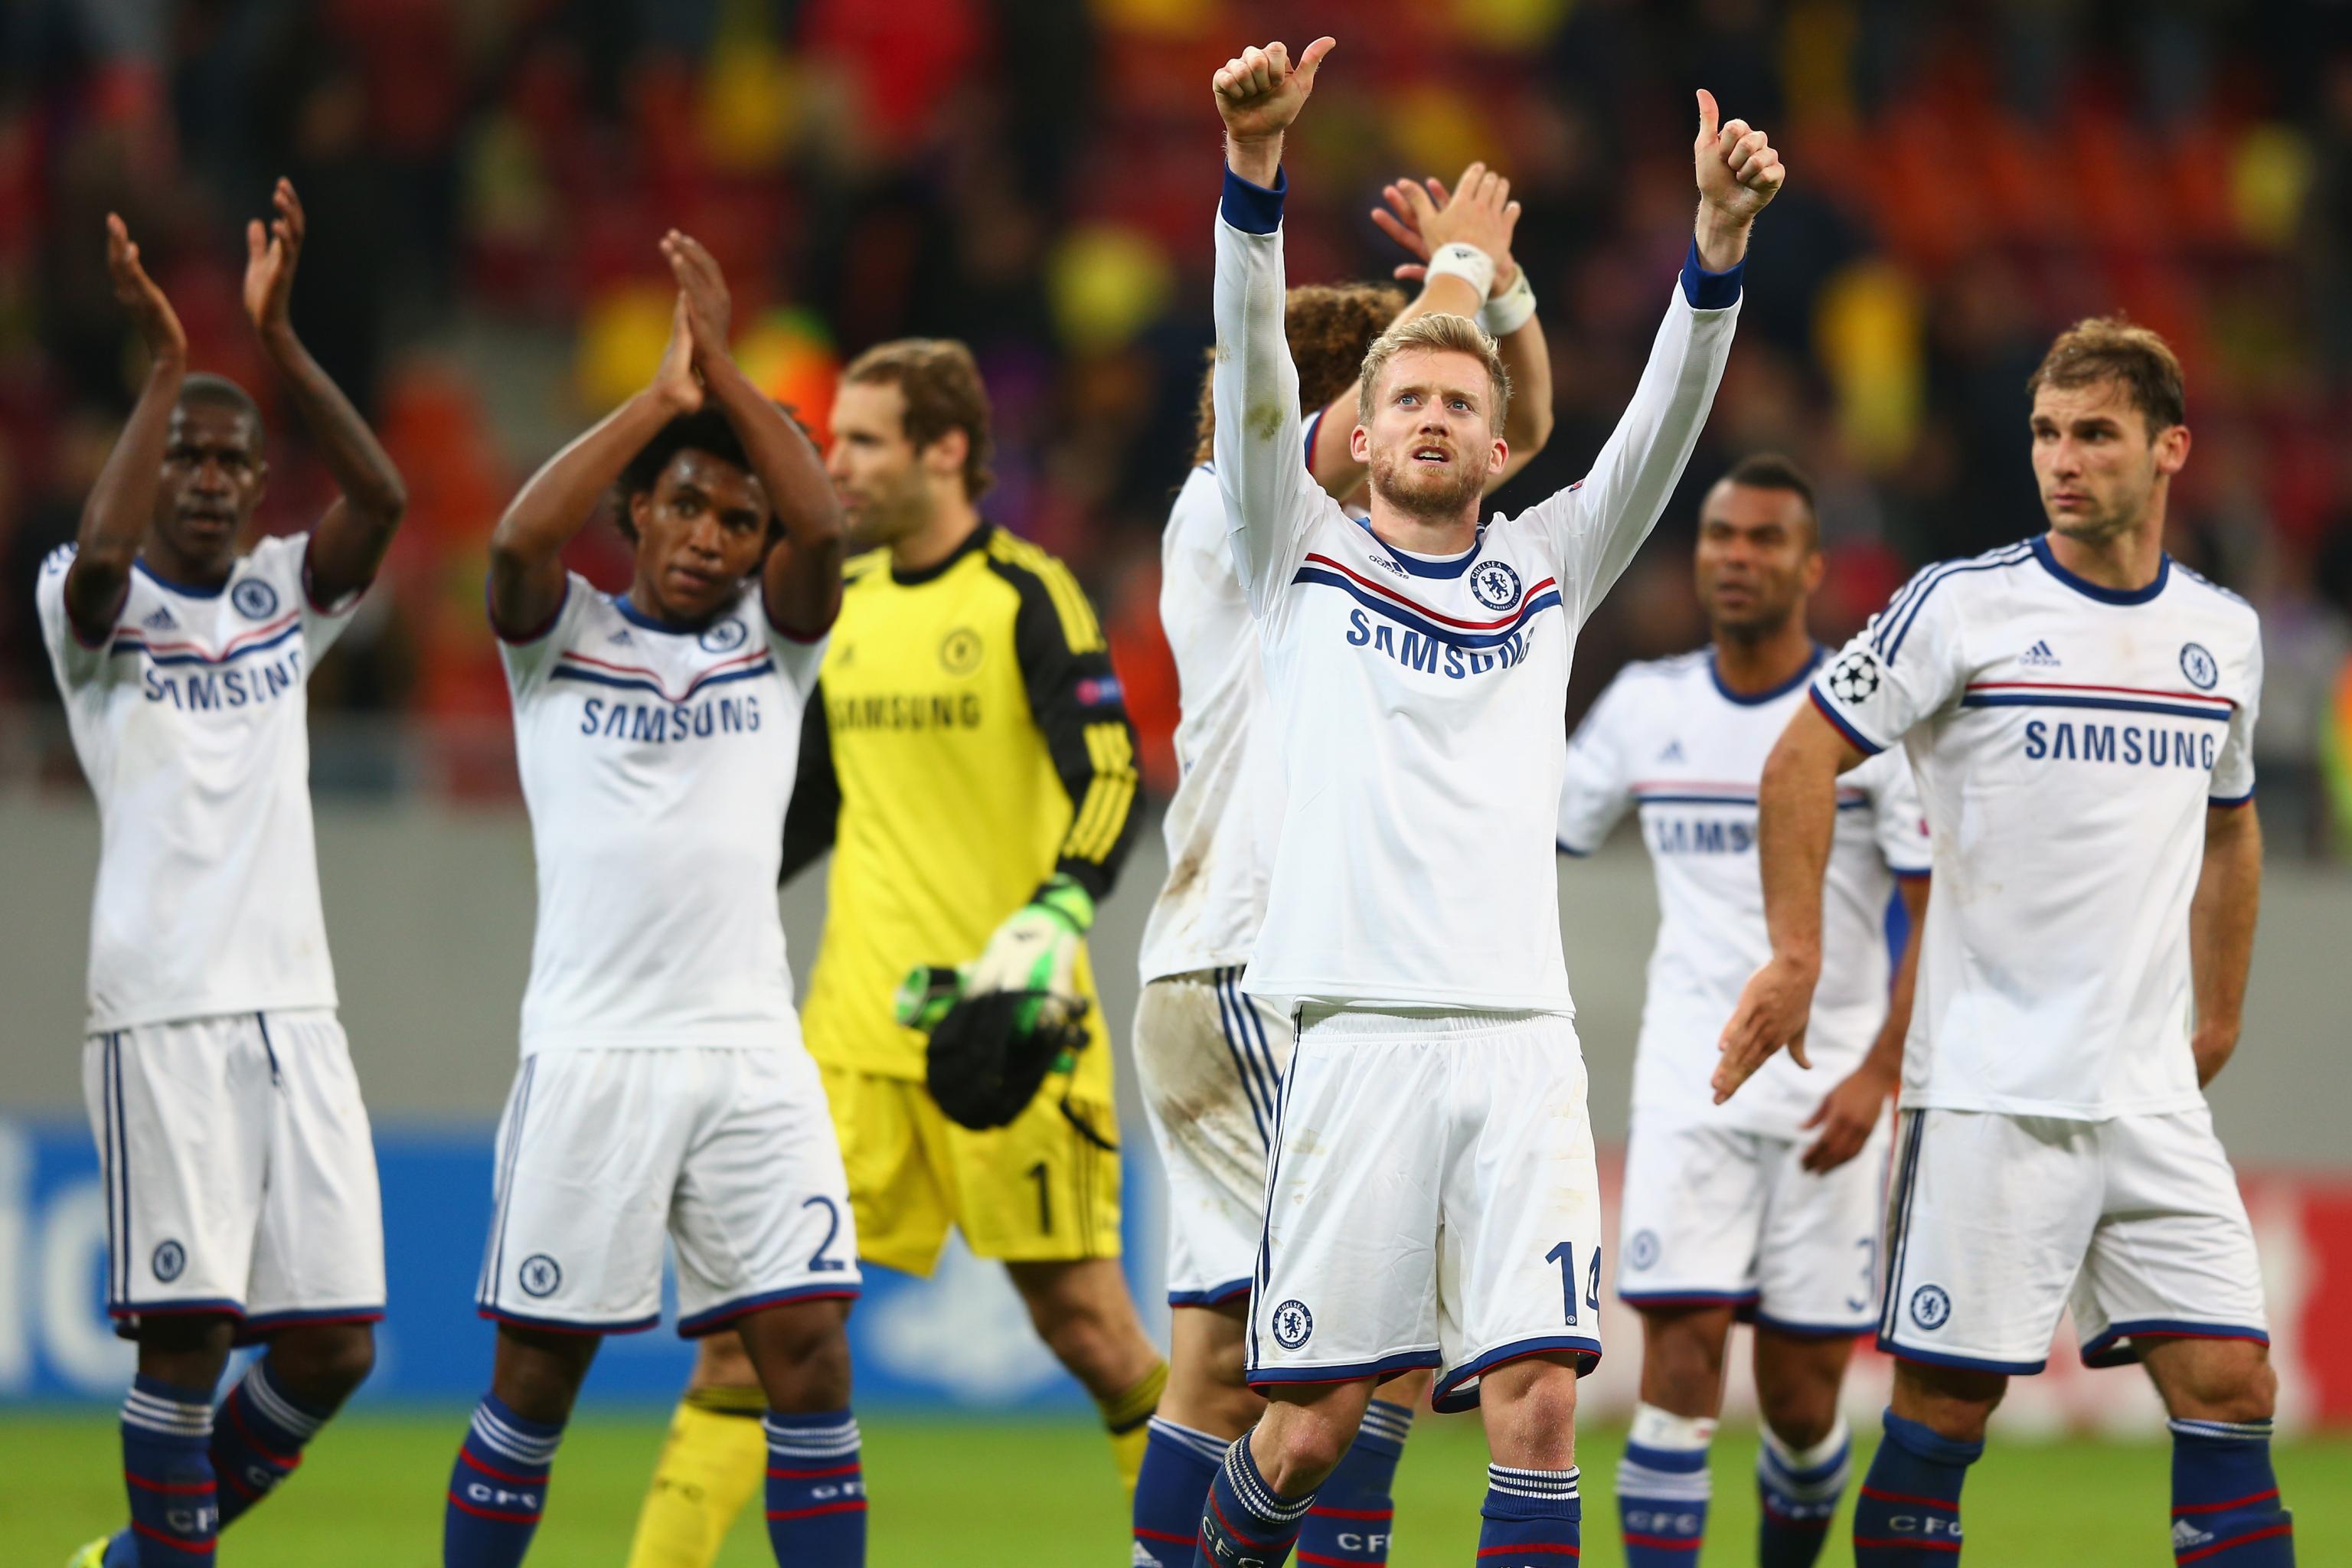 Champions League: Chelsea see off Steaua Bucharest to top Group E, Football News